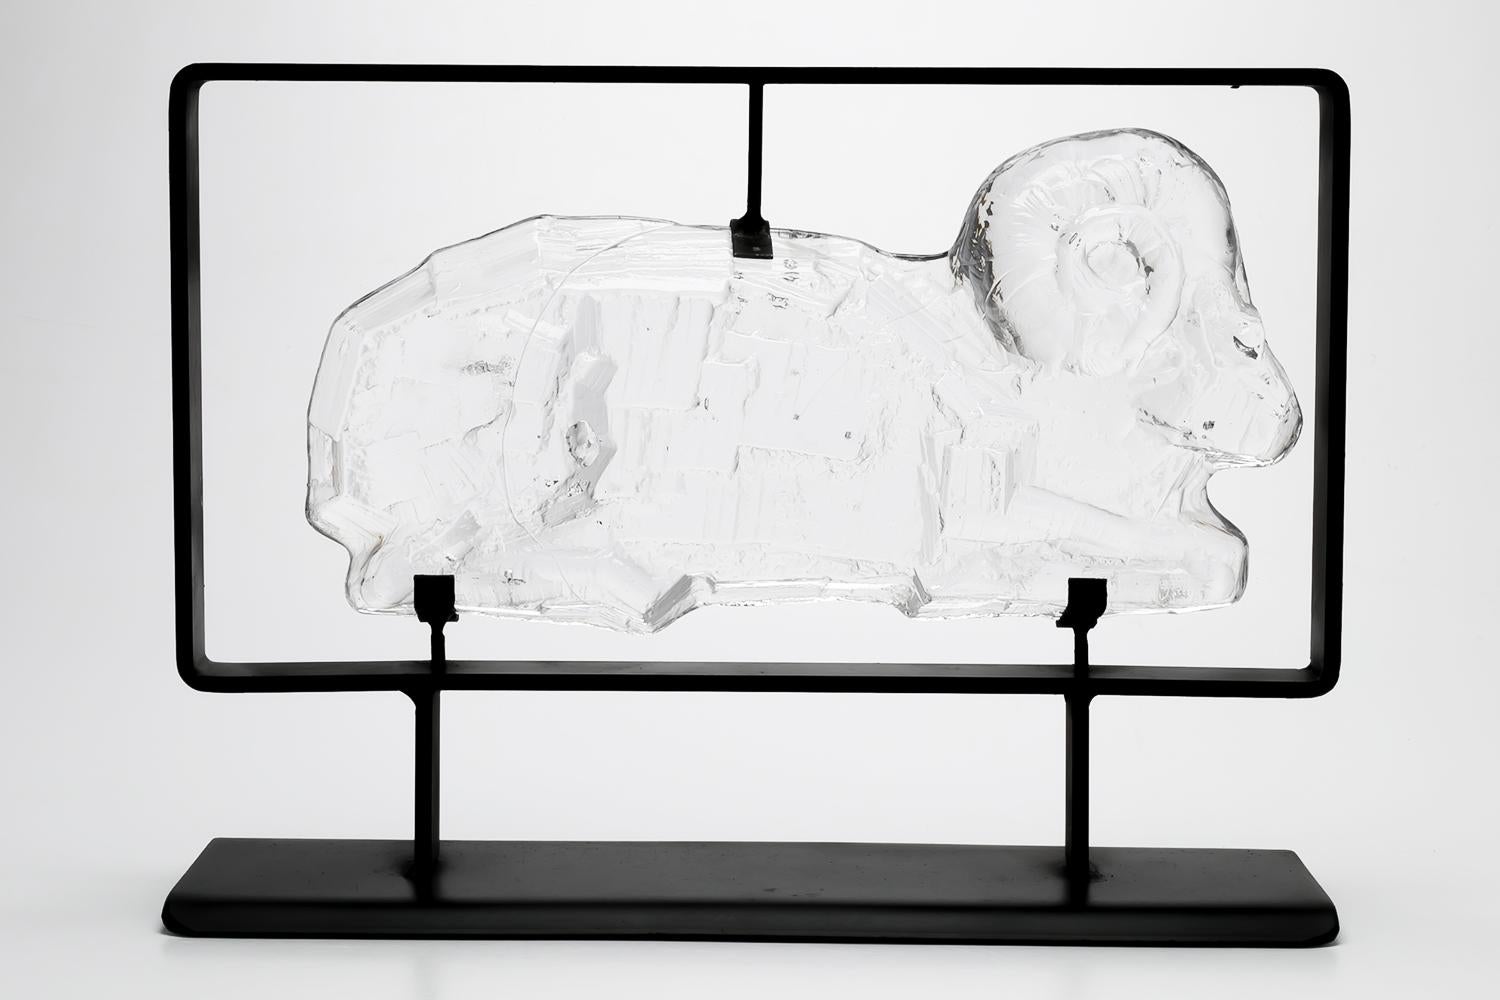 An object made of solid glass framed with black iron. A glass sculpture that expresses Höglan's unique worldview, which is said to have been influenced by indigenous culture and Mexican folk art. The surface of the solid glass, which is produced